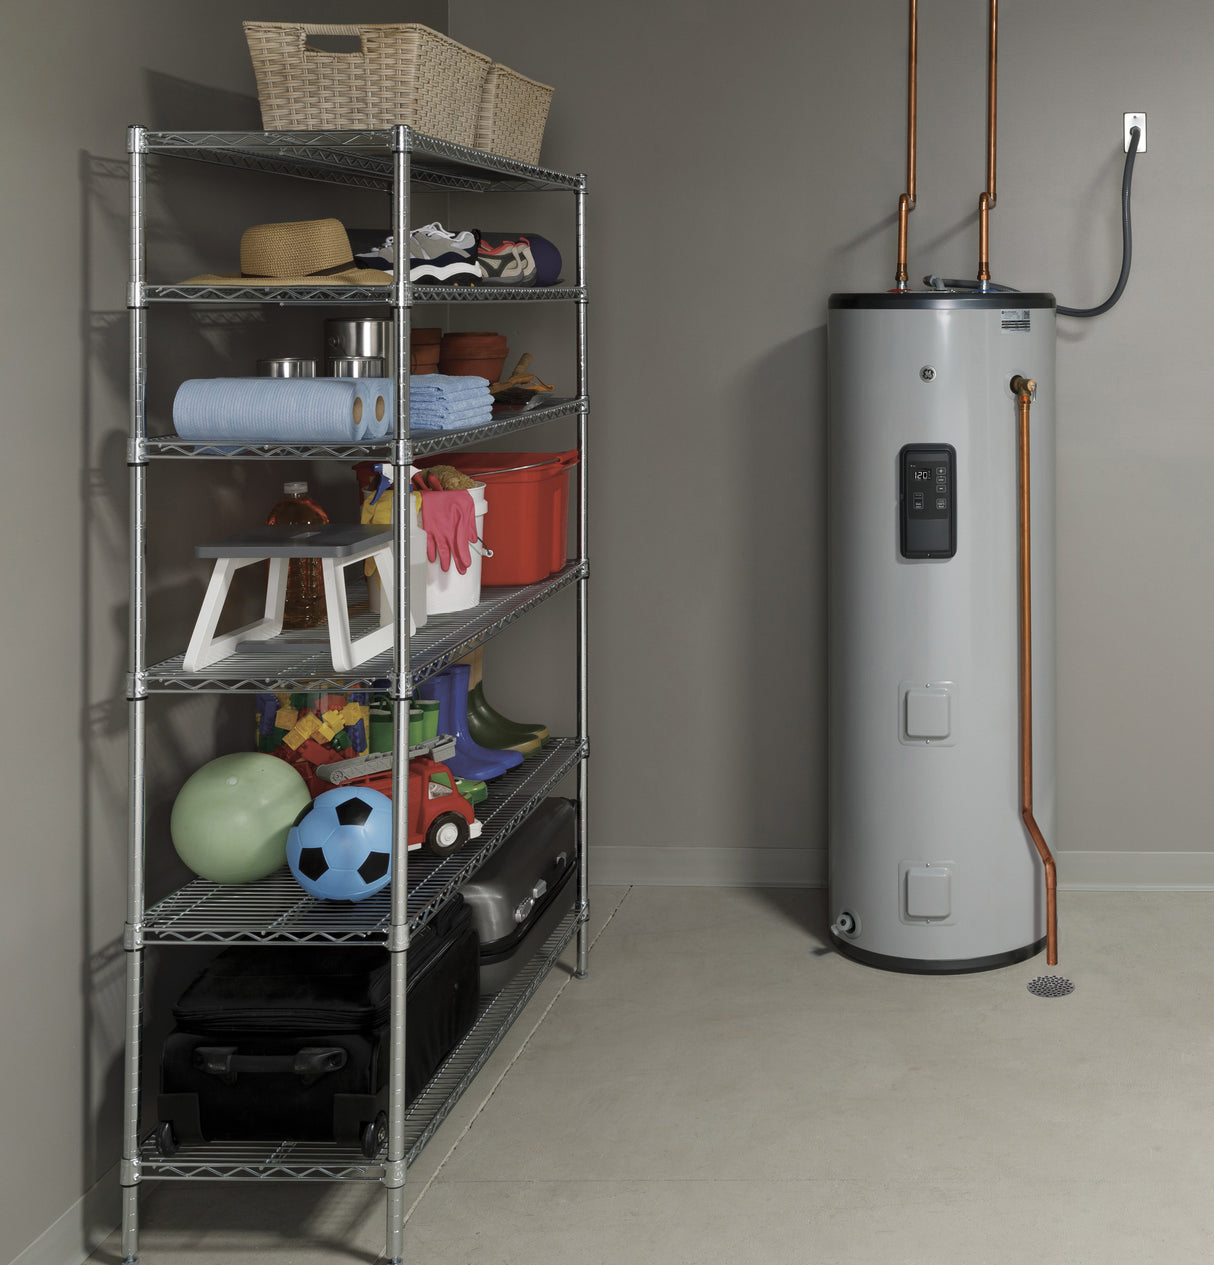 GE(R) Smart 50 Gallon Tall Electric Water Heater - (GE50T10BLM)